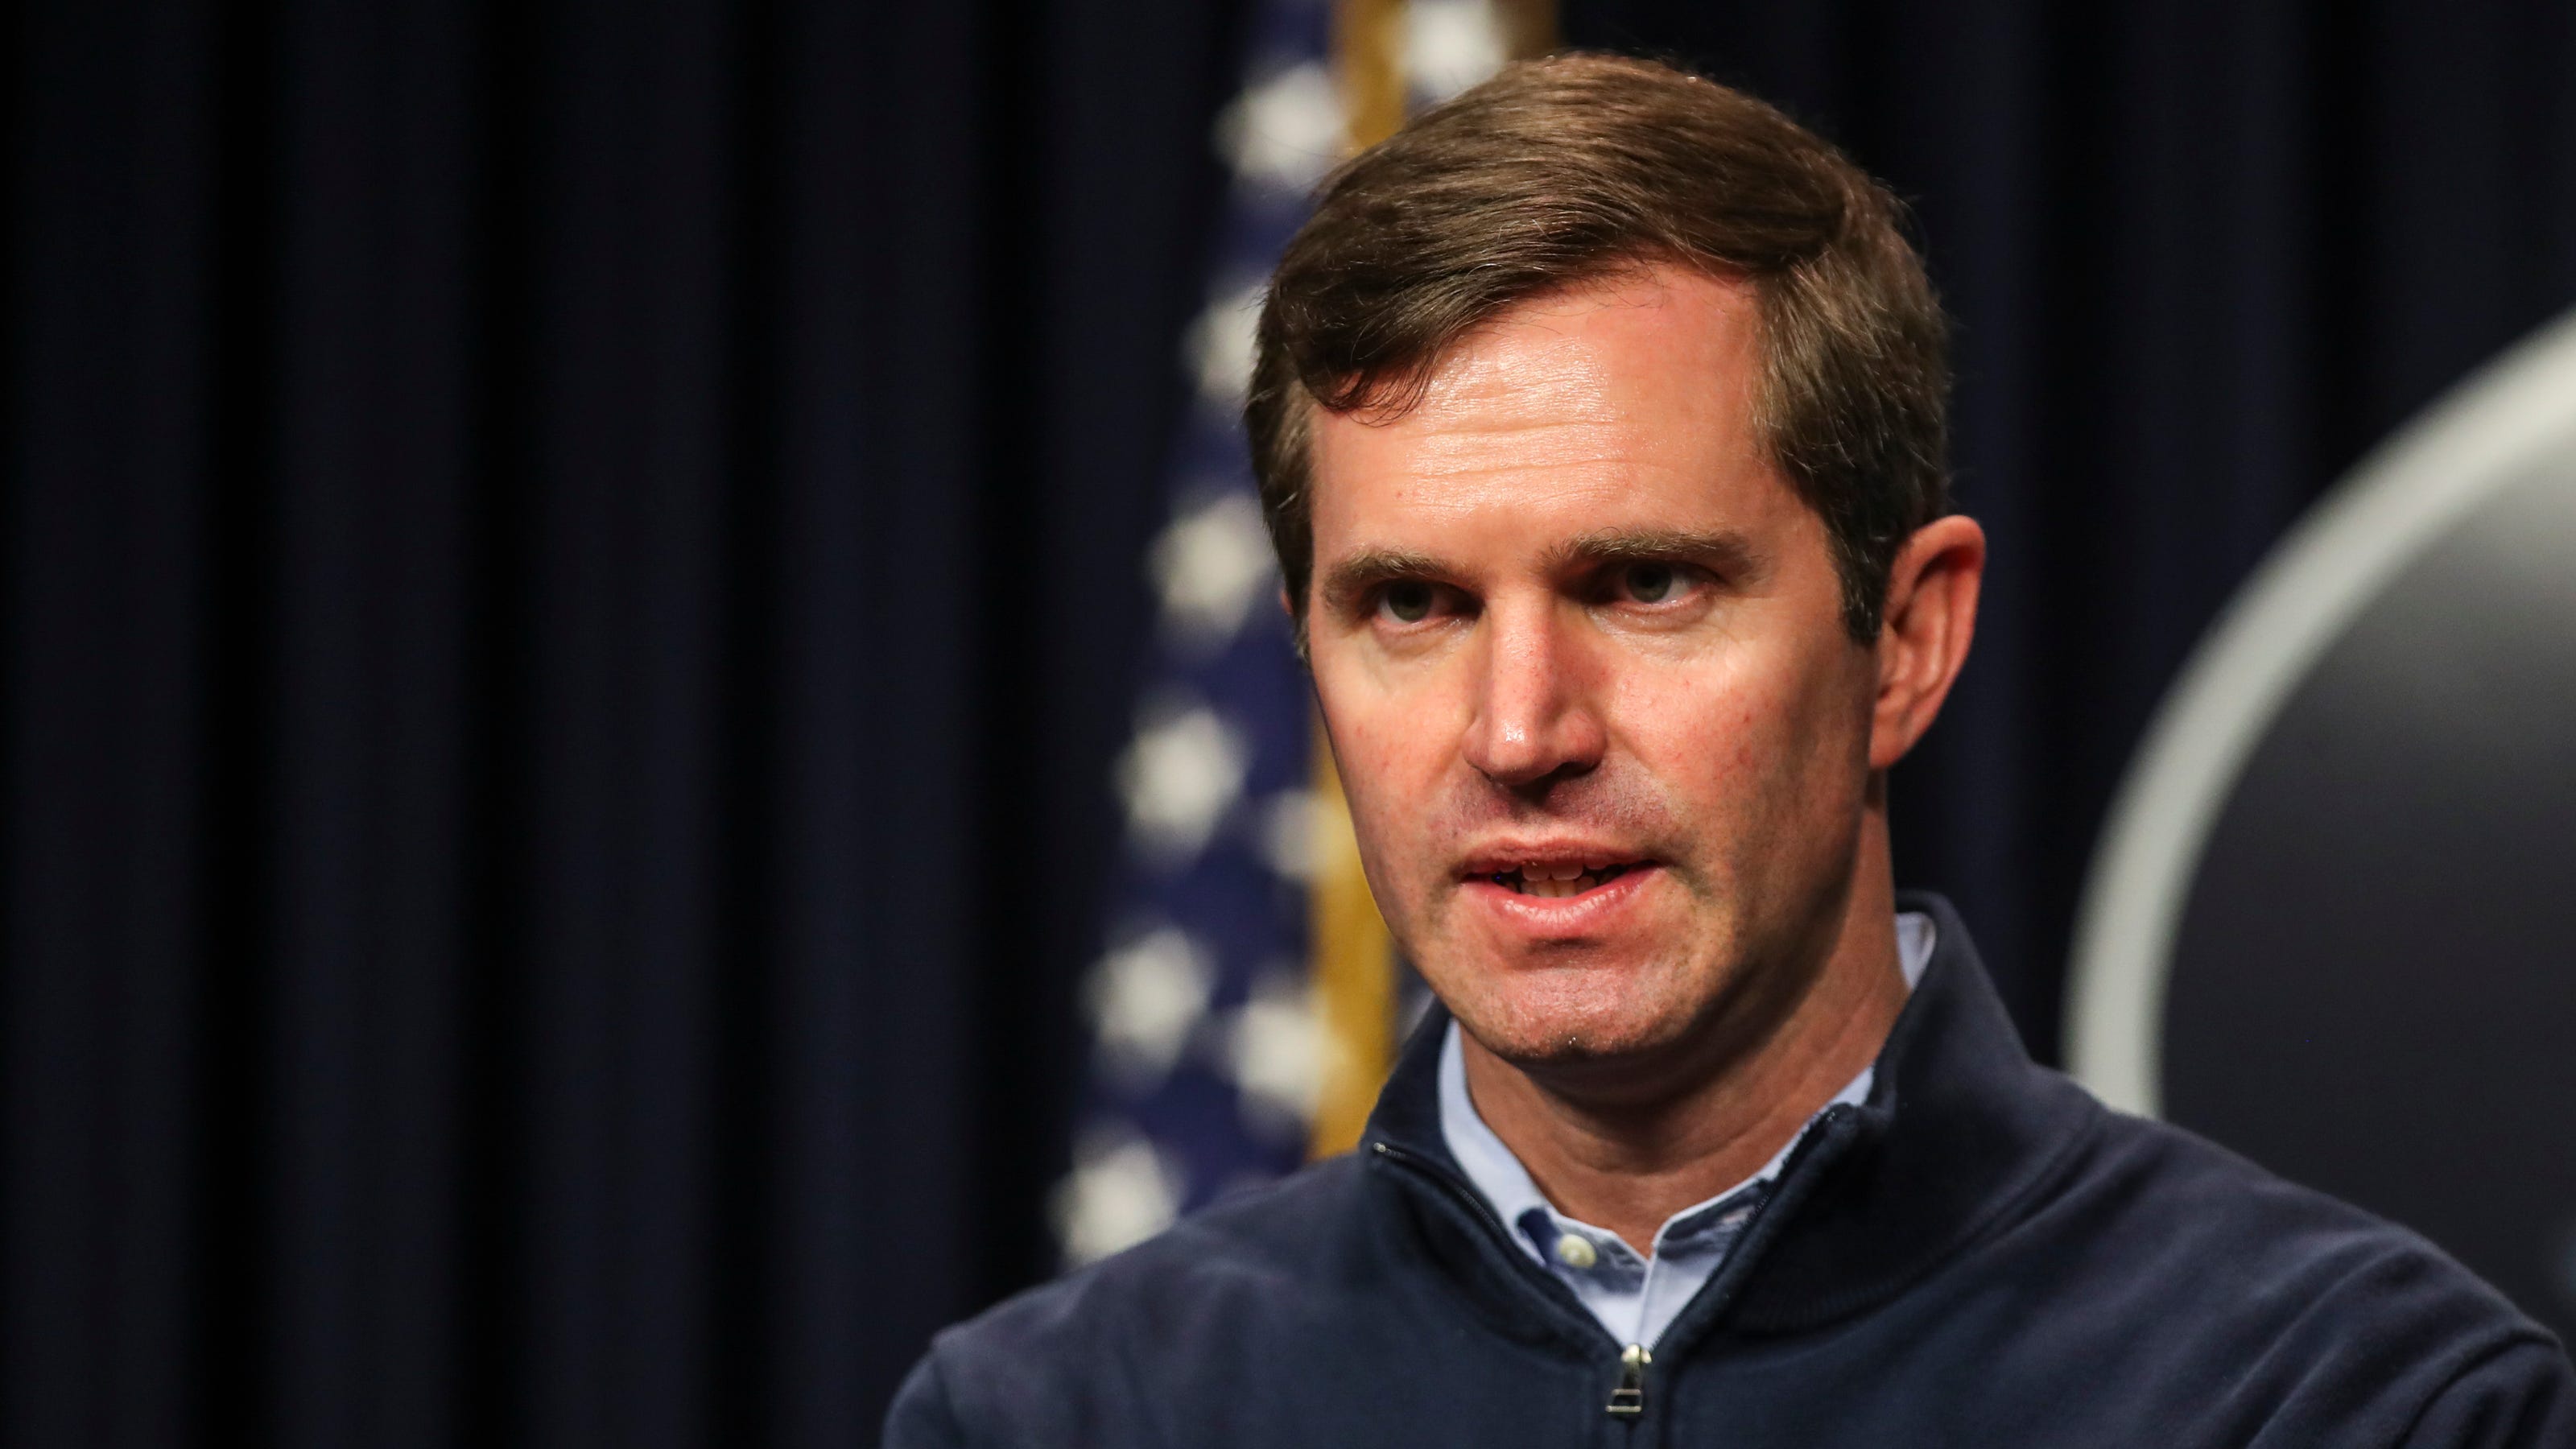 andy beshear age